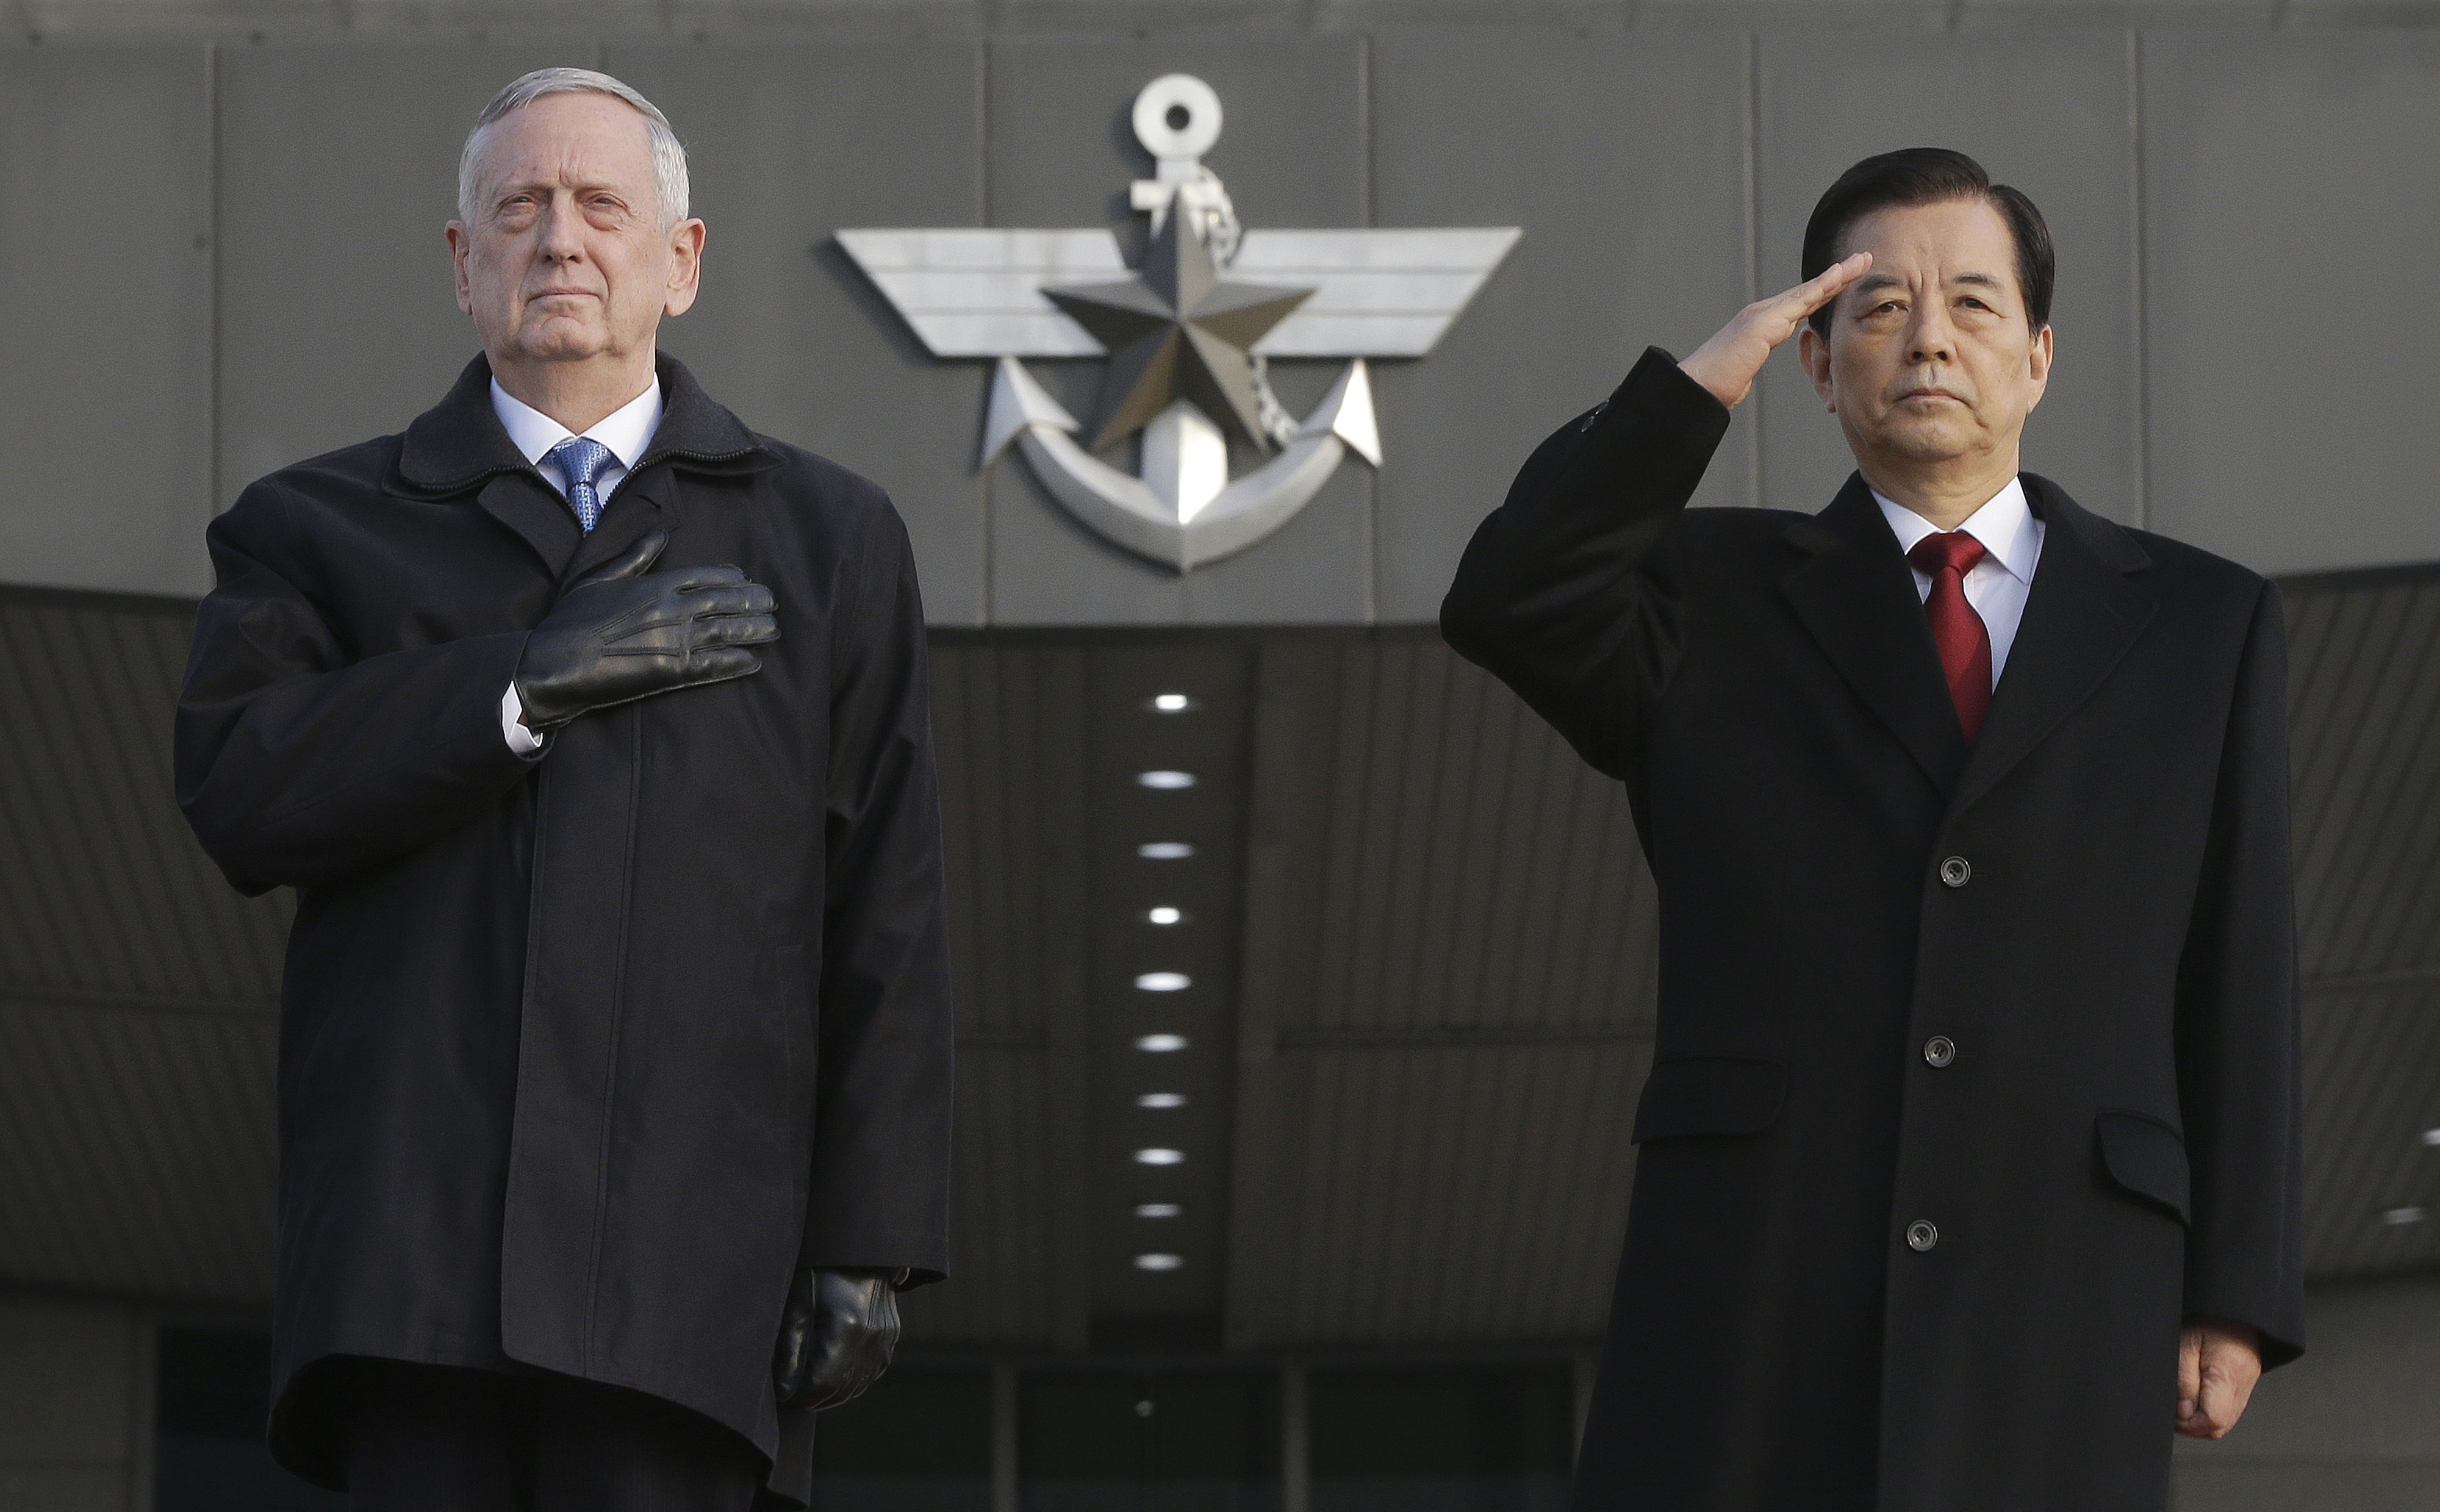 Mattis traveled to South Korea to meet with U.S. allies in the region.